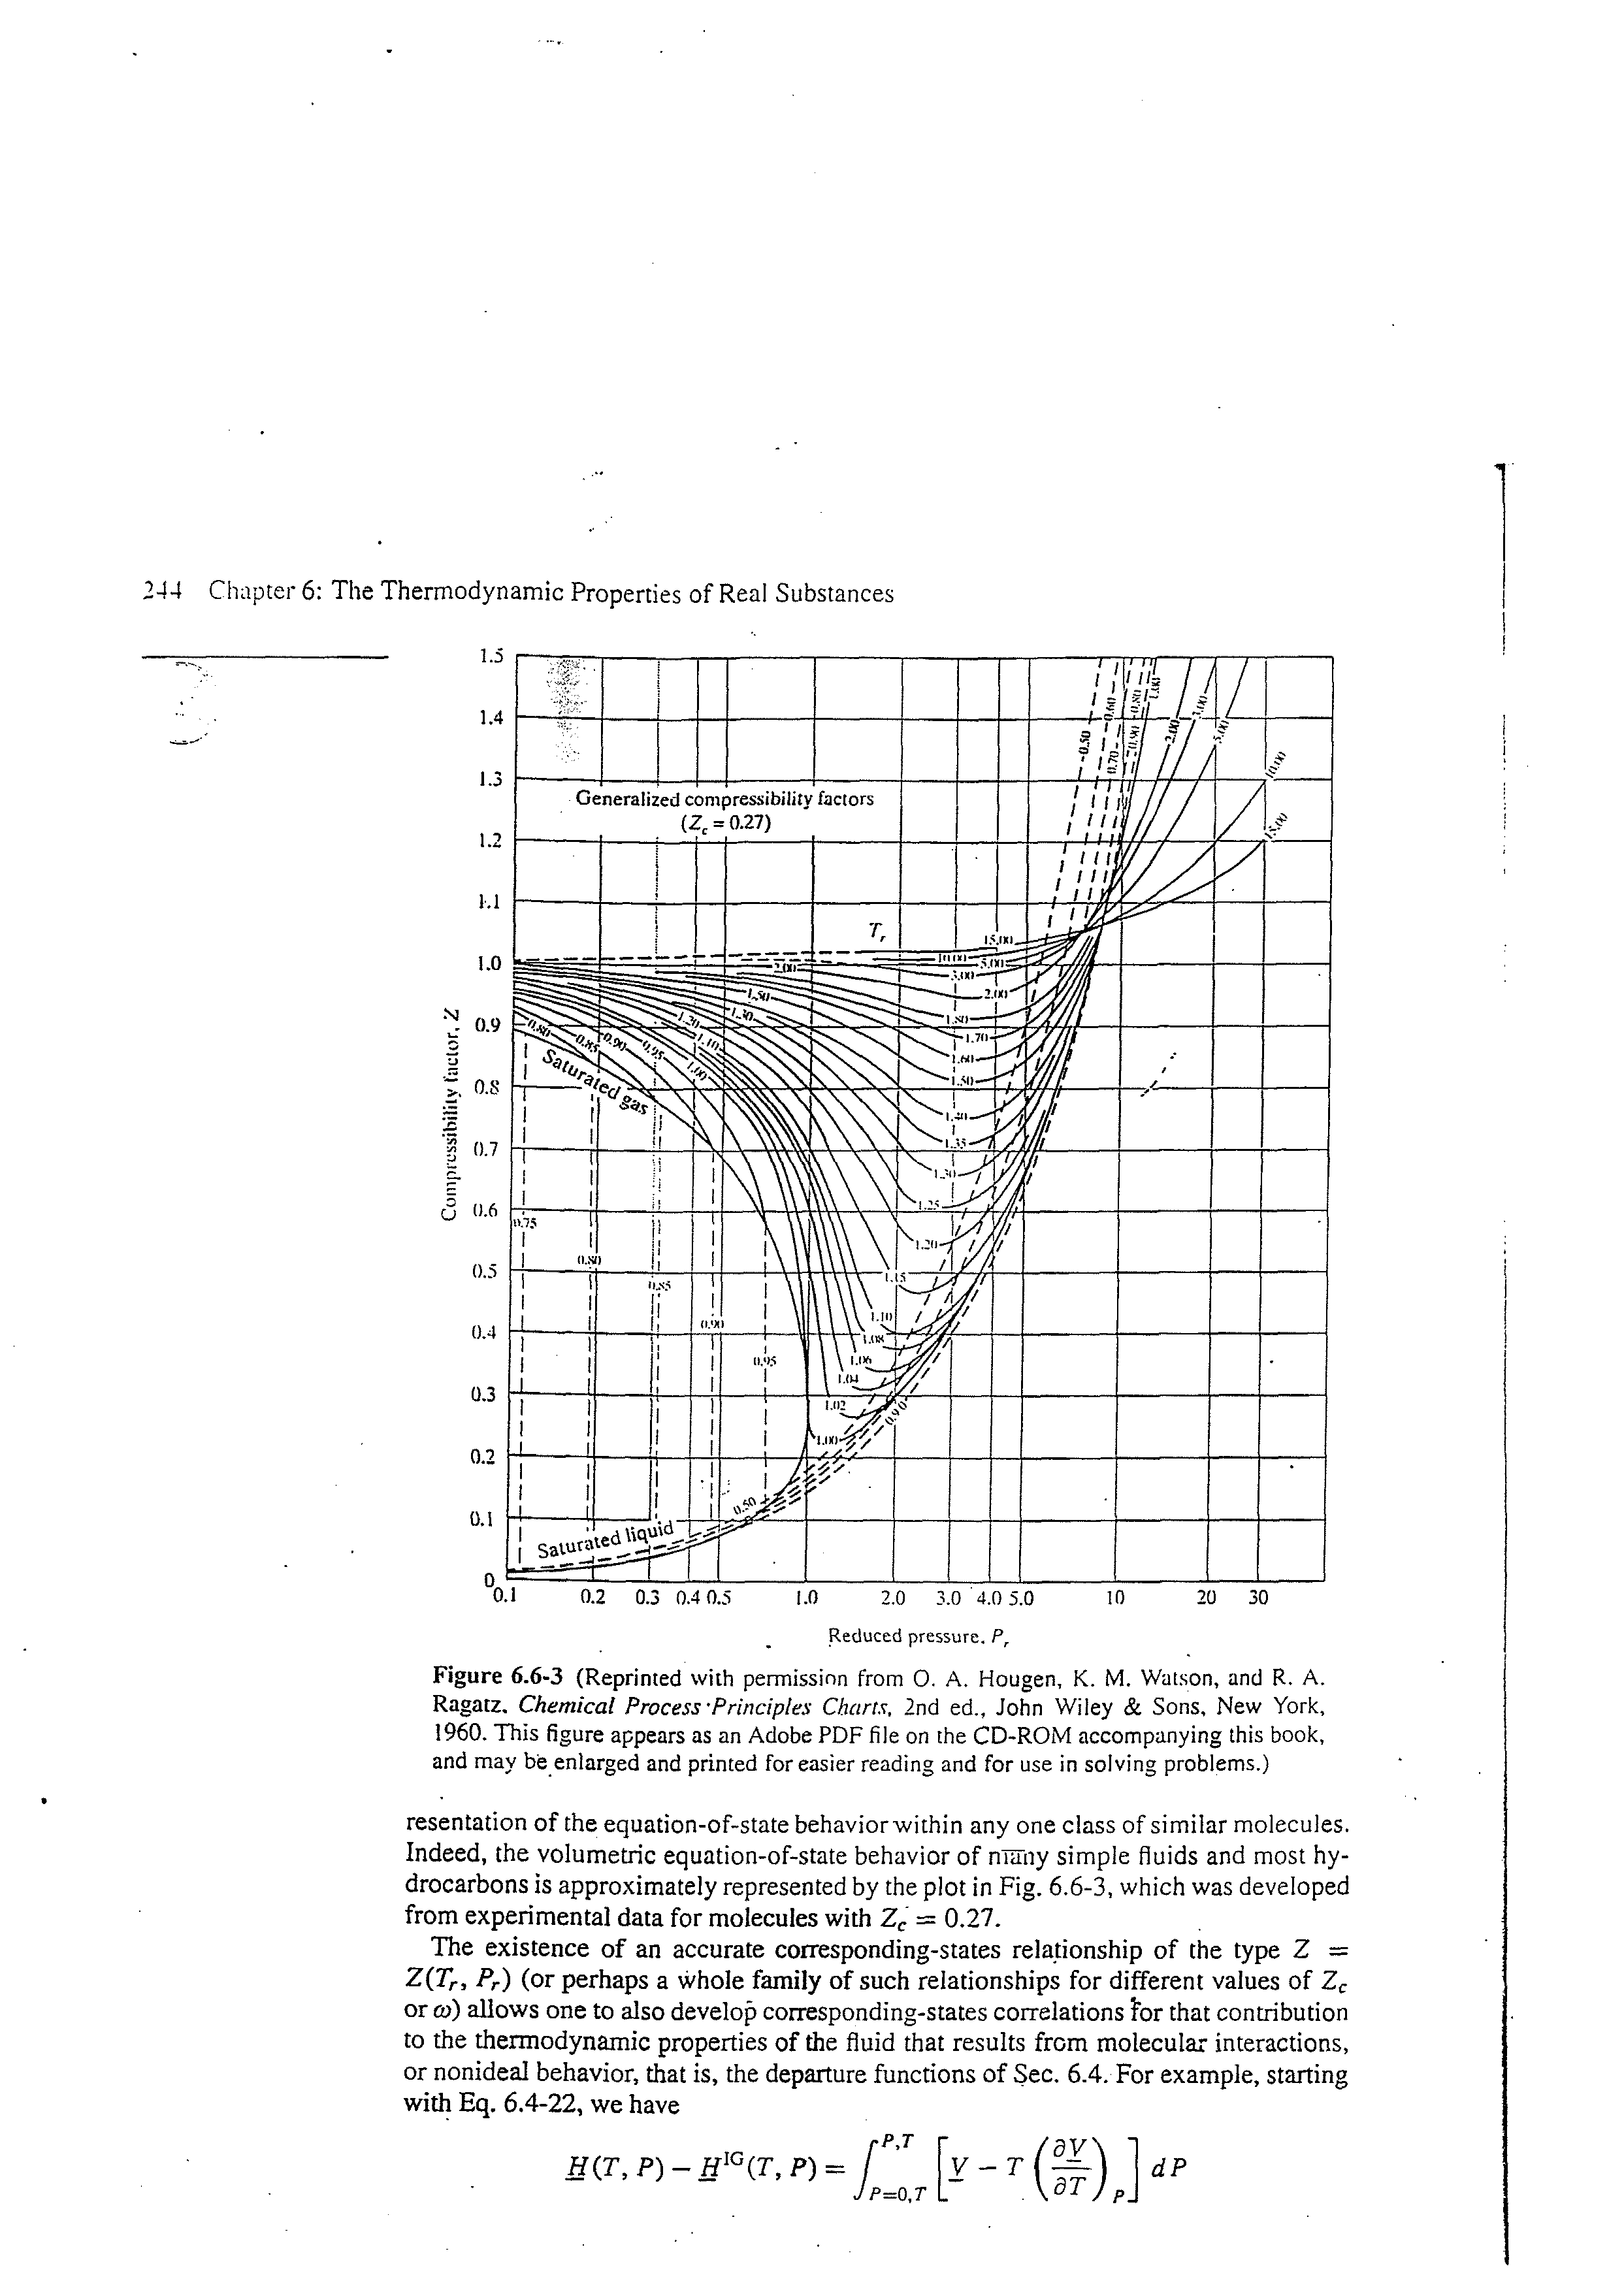 Figure 6.6-3 (Reprinted with permissinn from 0. A. Hougen, K. M. Watson, and R. A. Ragatz, Chemical Process Principles Charts, 2nd ed., John Wiley Sons, New York, I960. This figure appears as an Adobe PDF file on the CD-ROM accompanying this book, and may be enlarged and printed for easier reading and for use in solving problems.)...